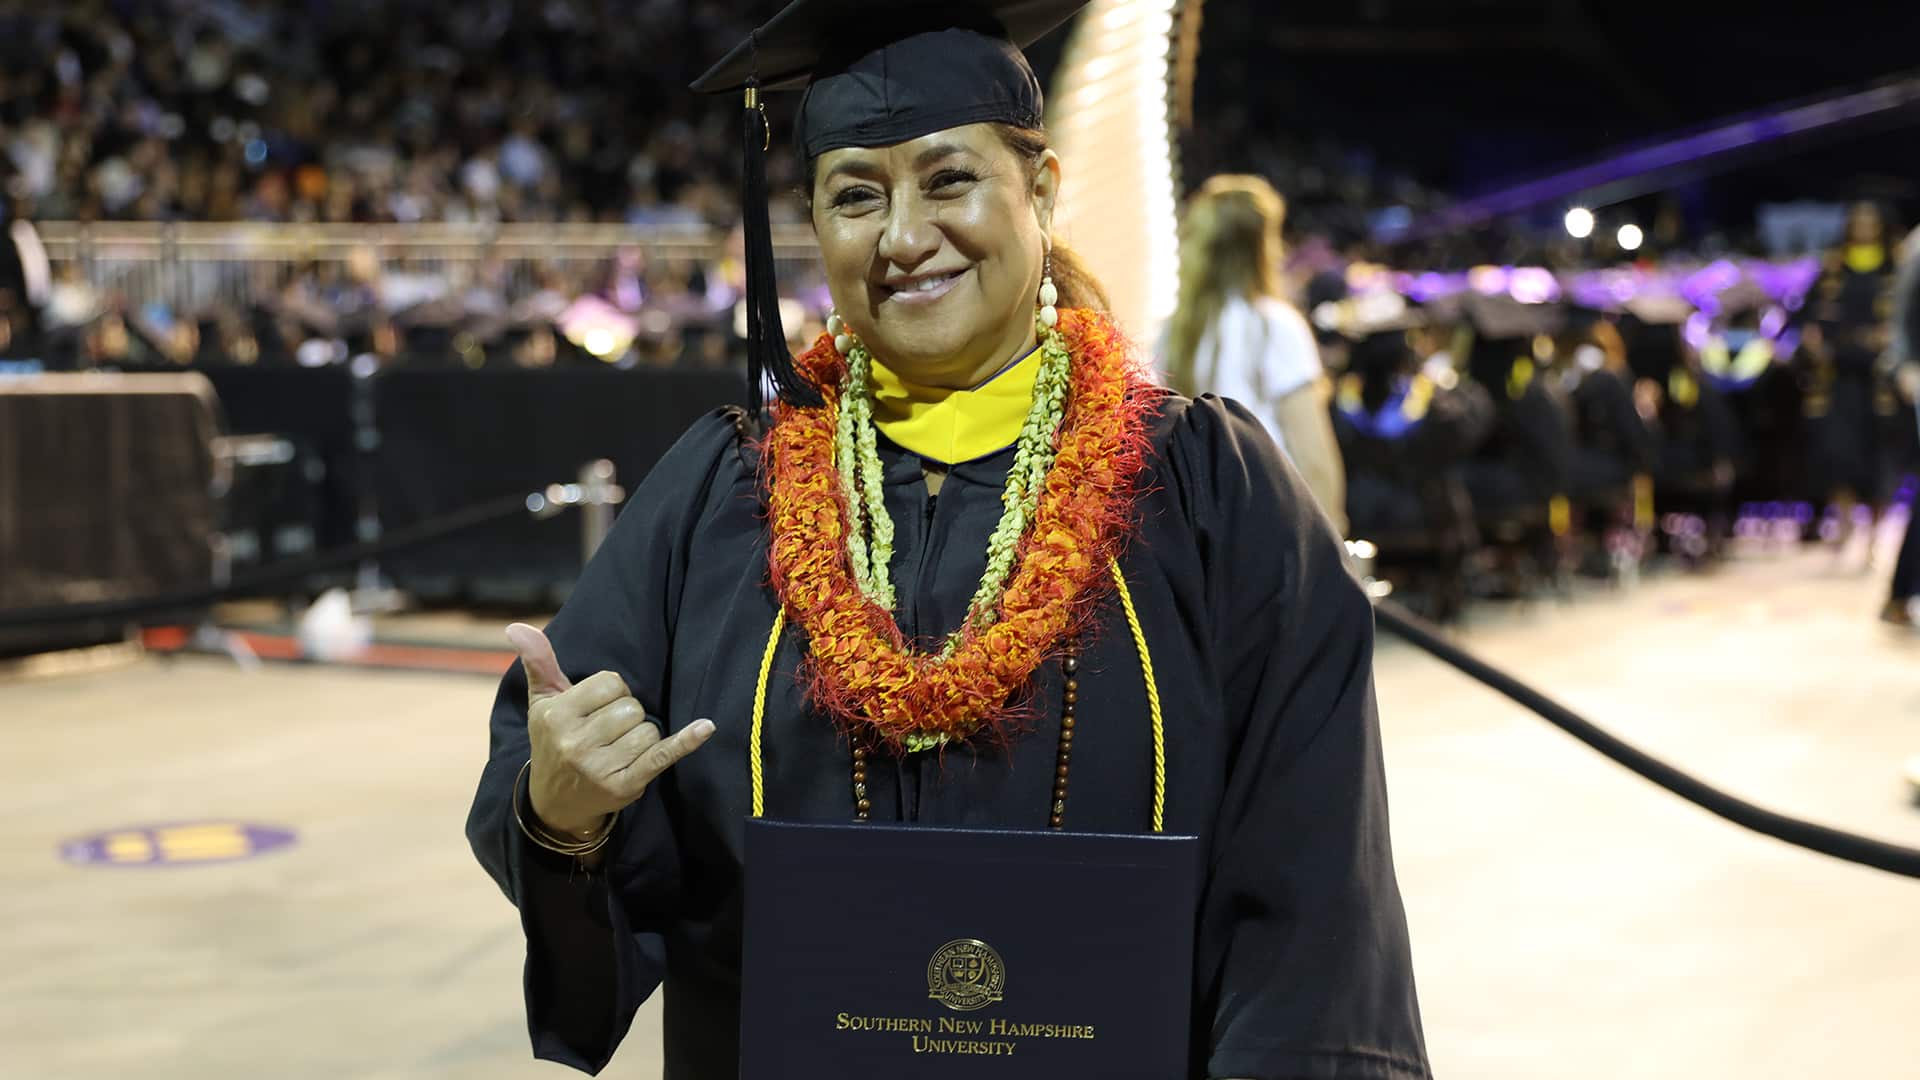 Sharla Kaleihua Kahale-Miner, holding her diploma and making a traditional Hawaiian hand gesture, at the 2023 Southern New Hampshire University commencement ceremony.